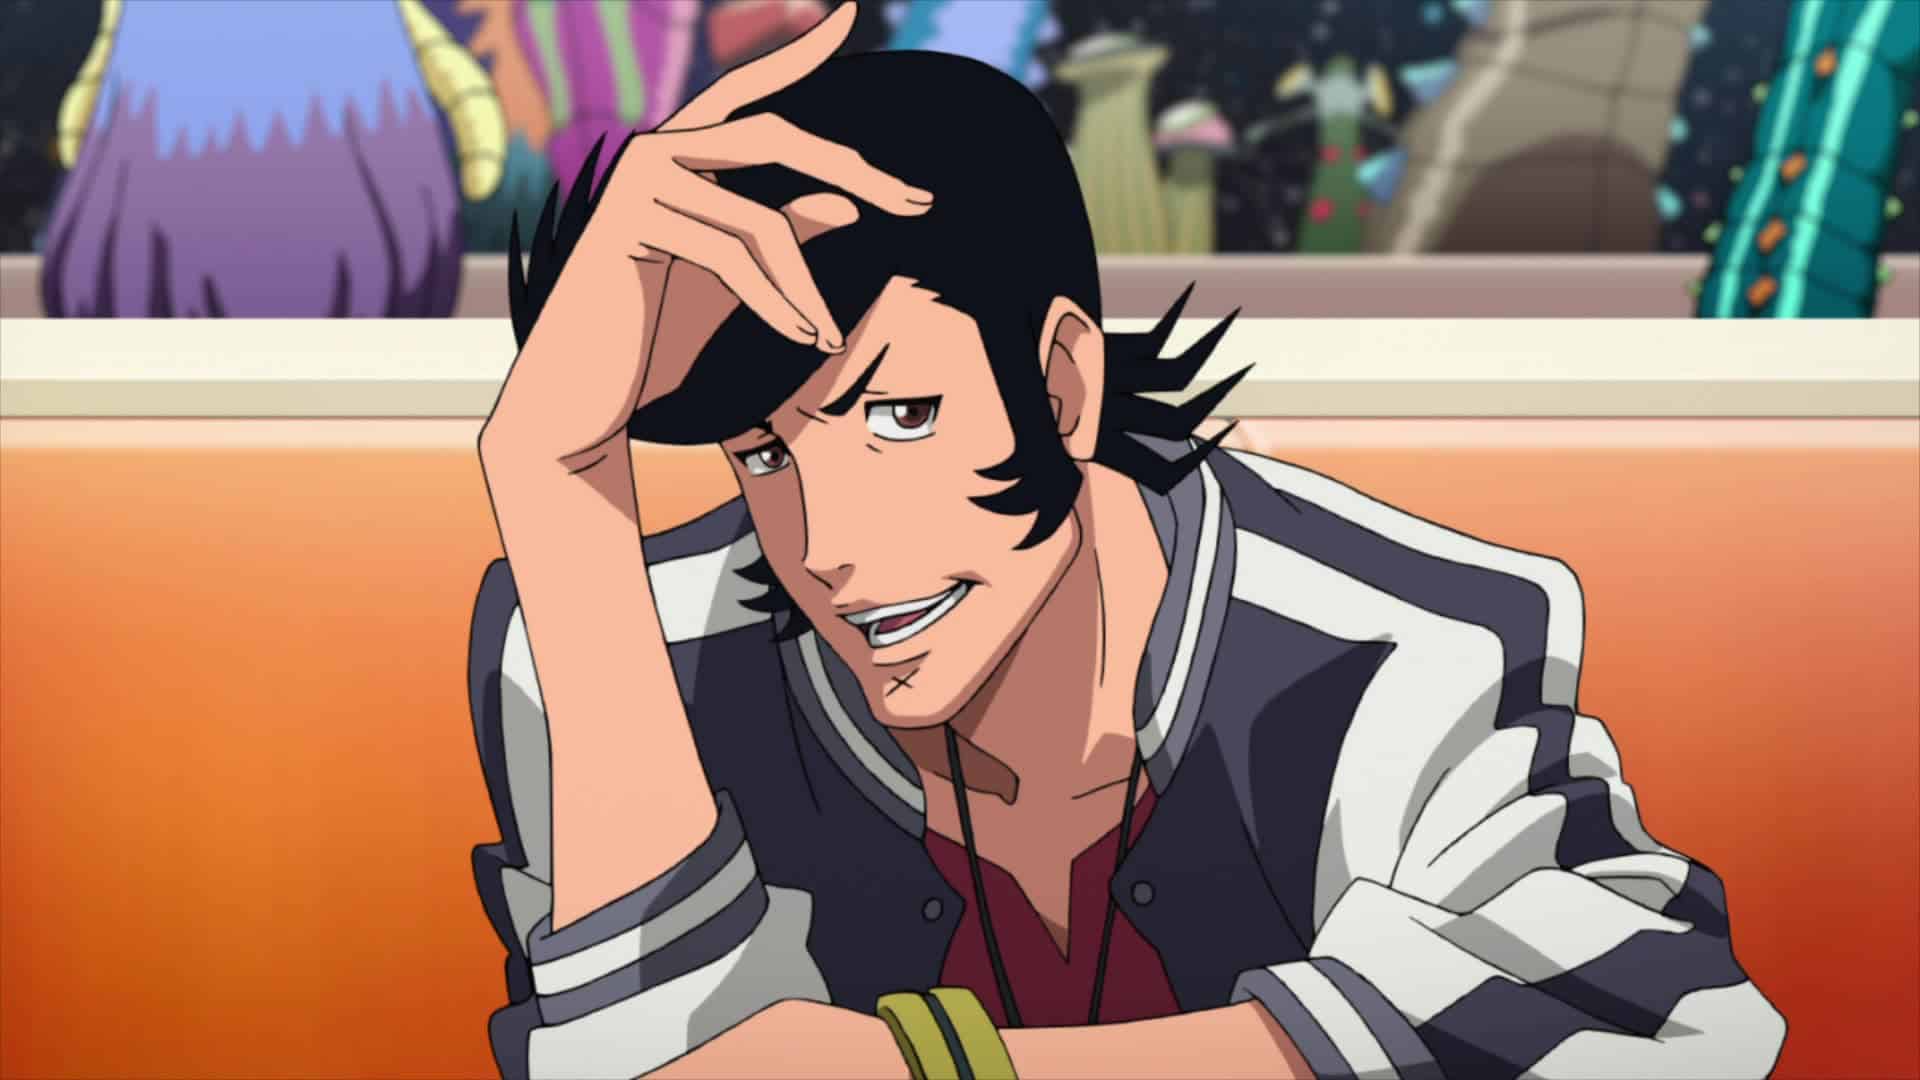 The main character, Dandy, from the anime series Space Dandy.